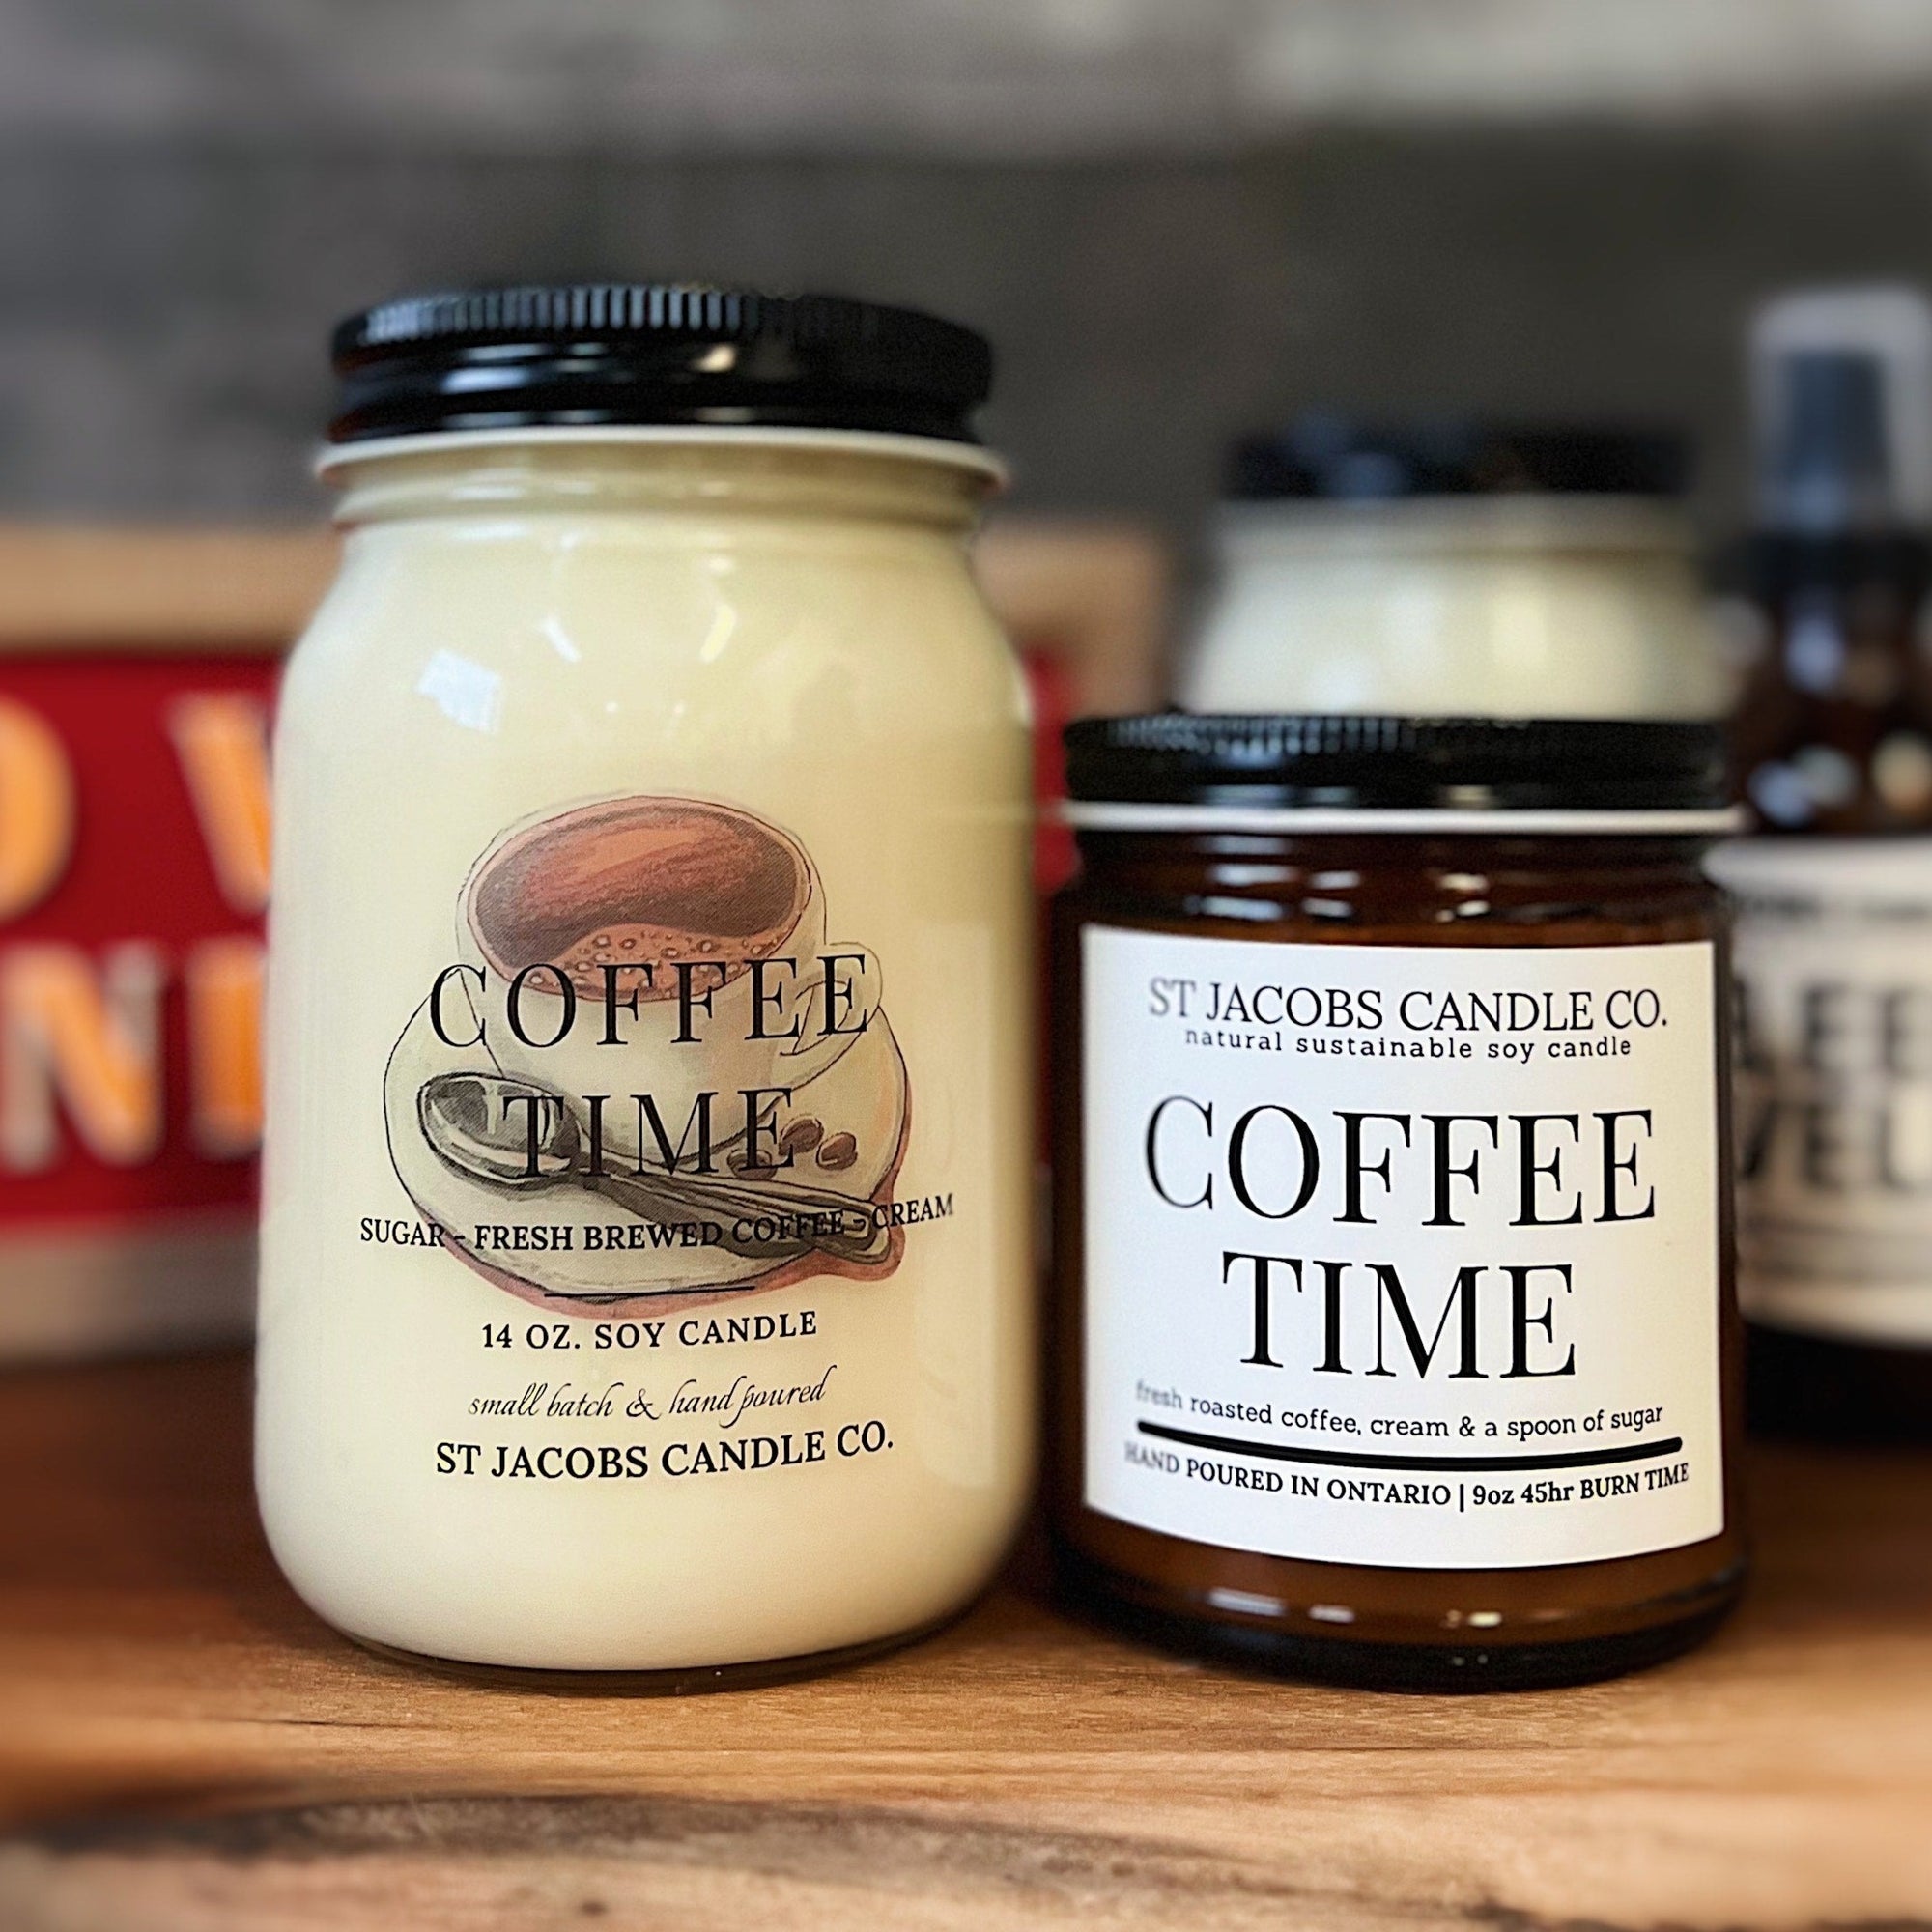 "COFFEE TIME" Natural Soy Candle